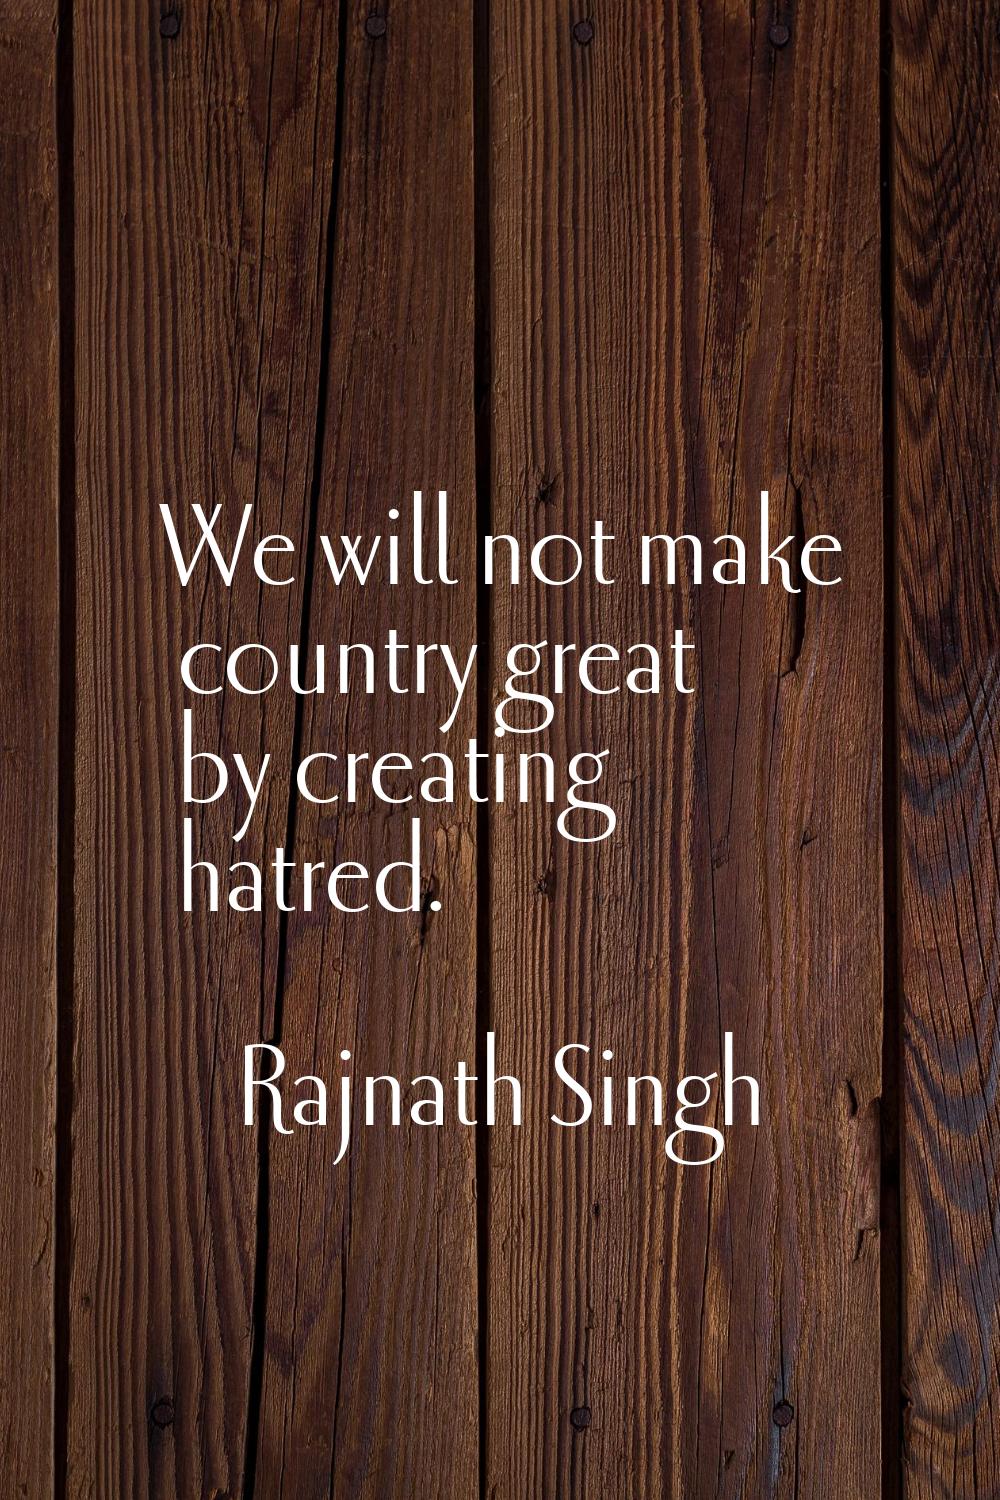 We will not make country great by creating hatred.